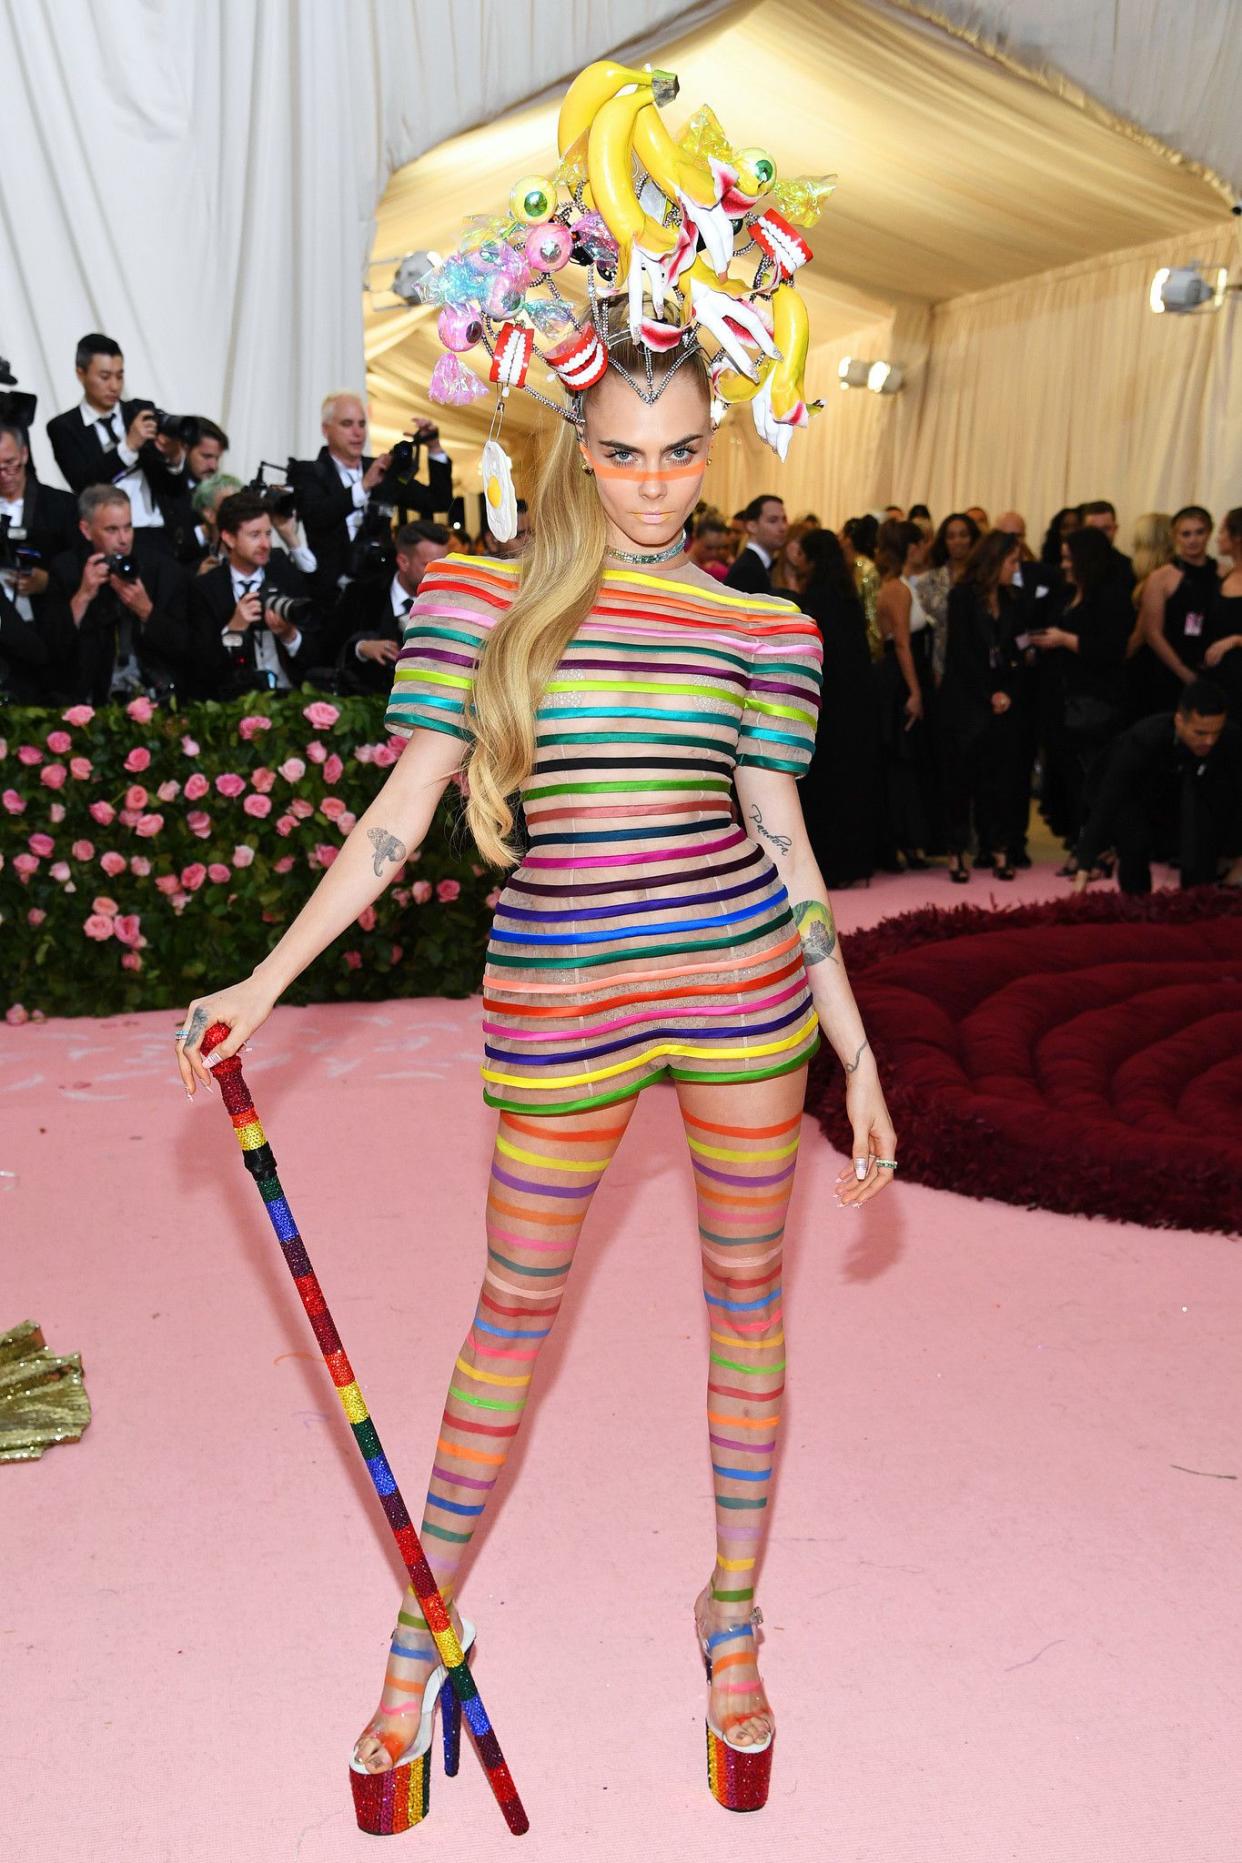 Cara Delevingne attends The 2019 Met Gala Celebrating Camp: Notes on Fashion at Metropolitan Museum of Art on May 06, 2019 in New York City.